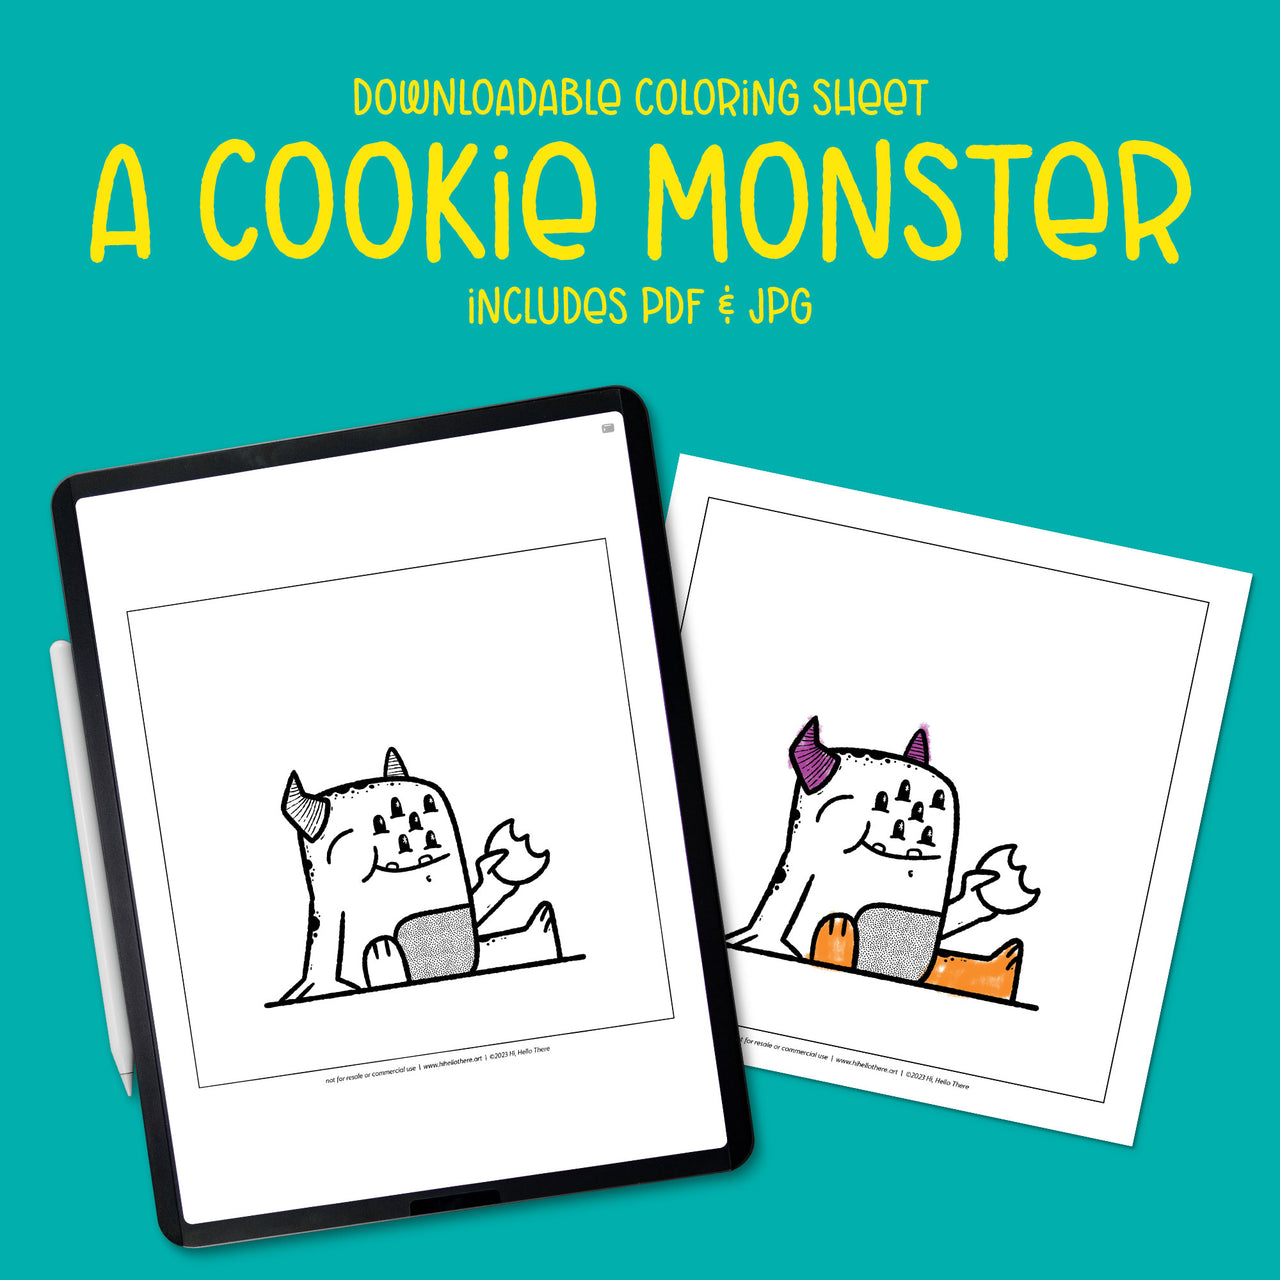 A Cookie Monster Downloadable Coloring Sheet